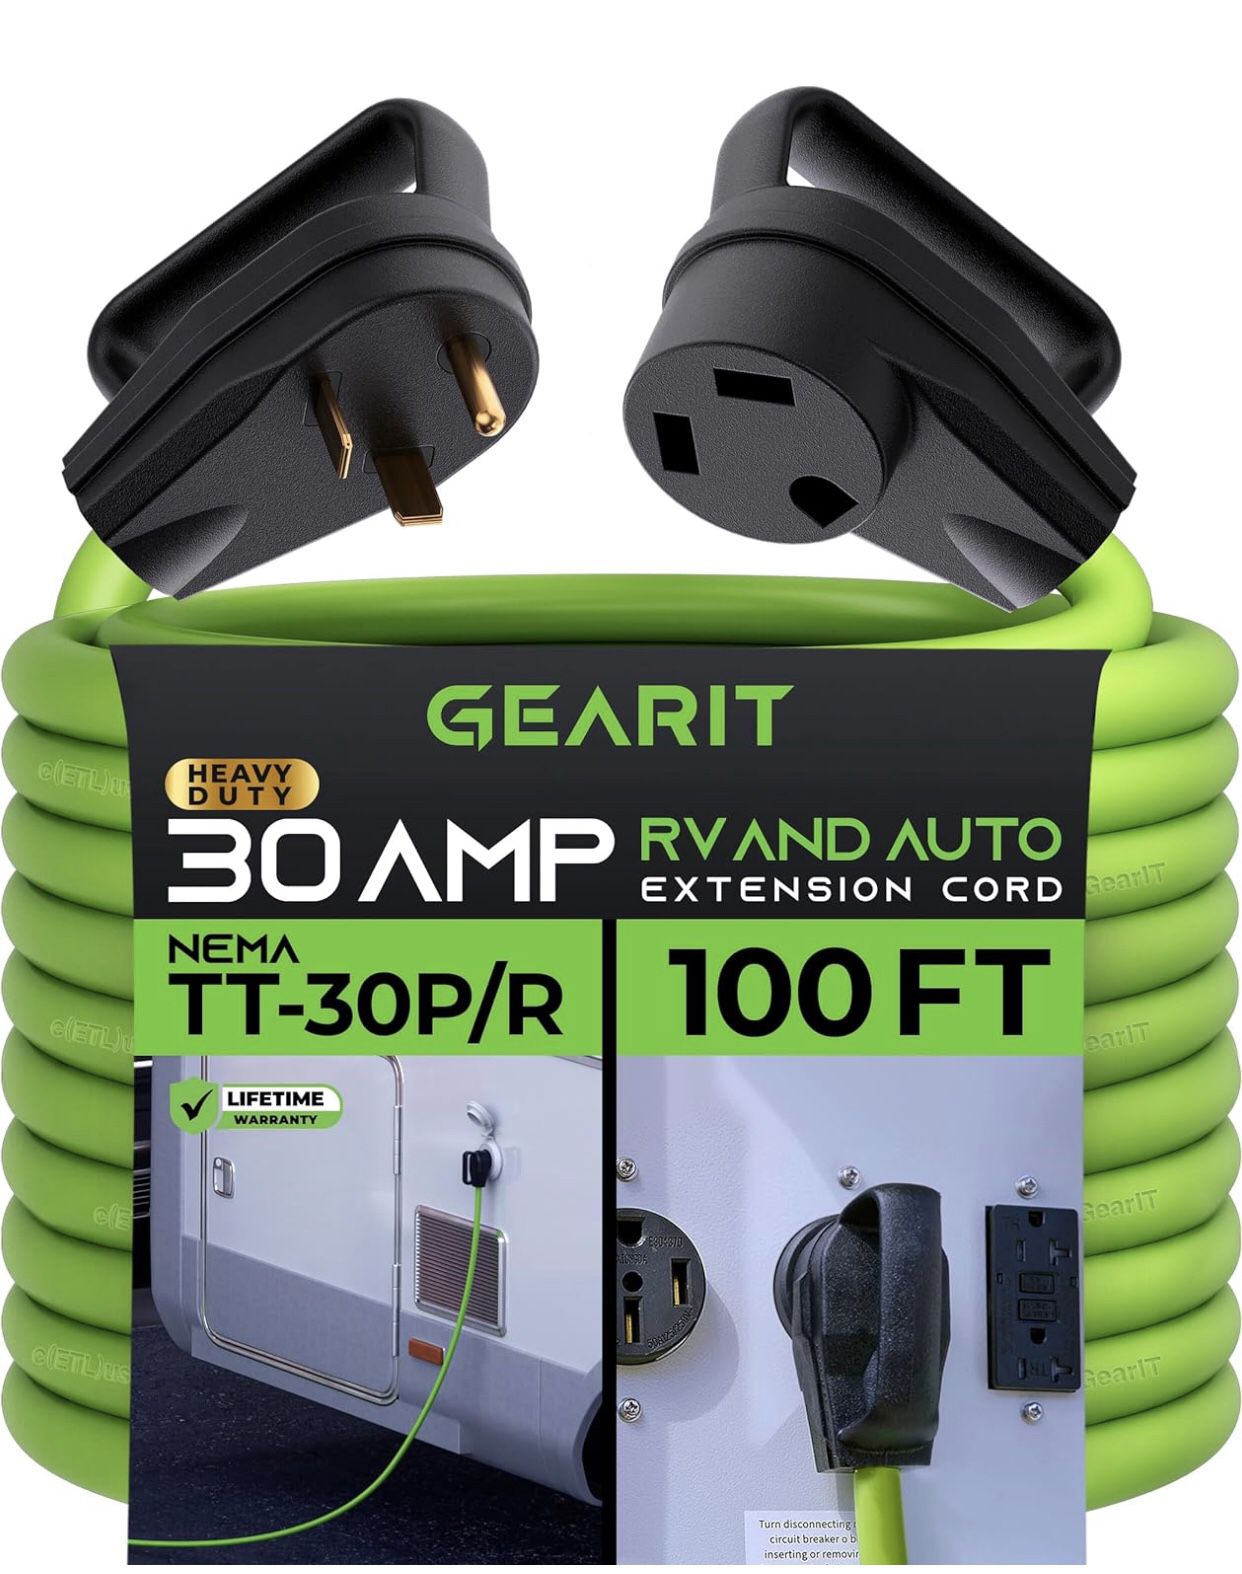 NEW! GearIT 30-Amp Extension Cord for RV and Auto, (100-Feet) 3-Prong 250-Volt 10/3 STW 10AWG Gauge